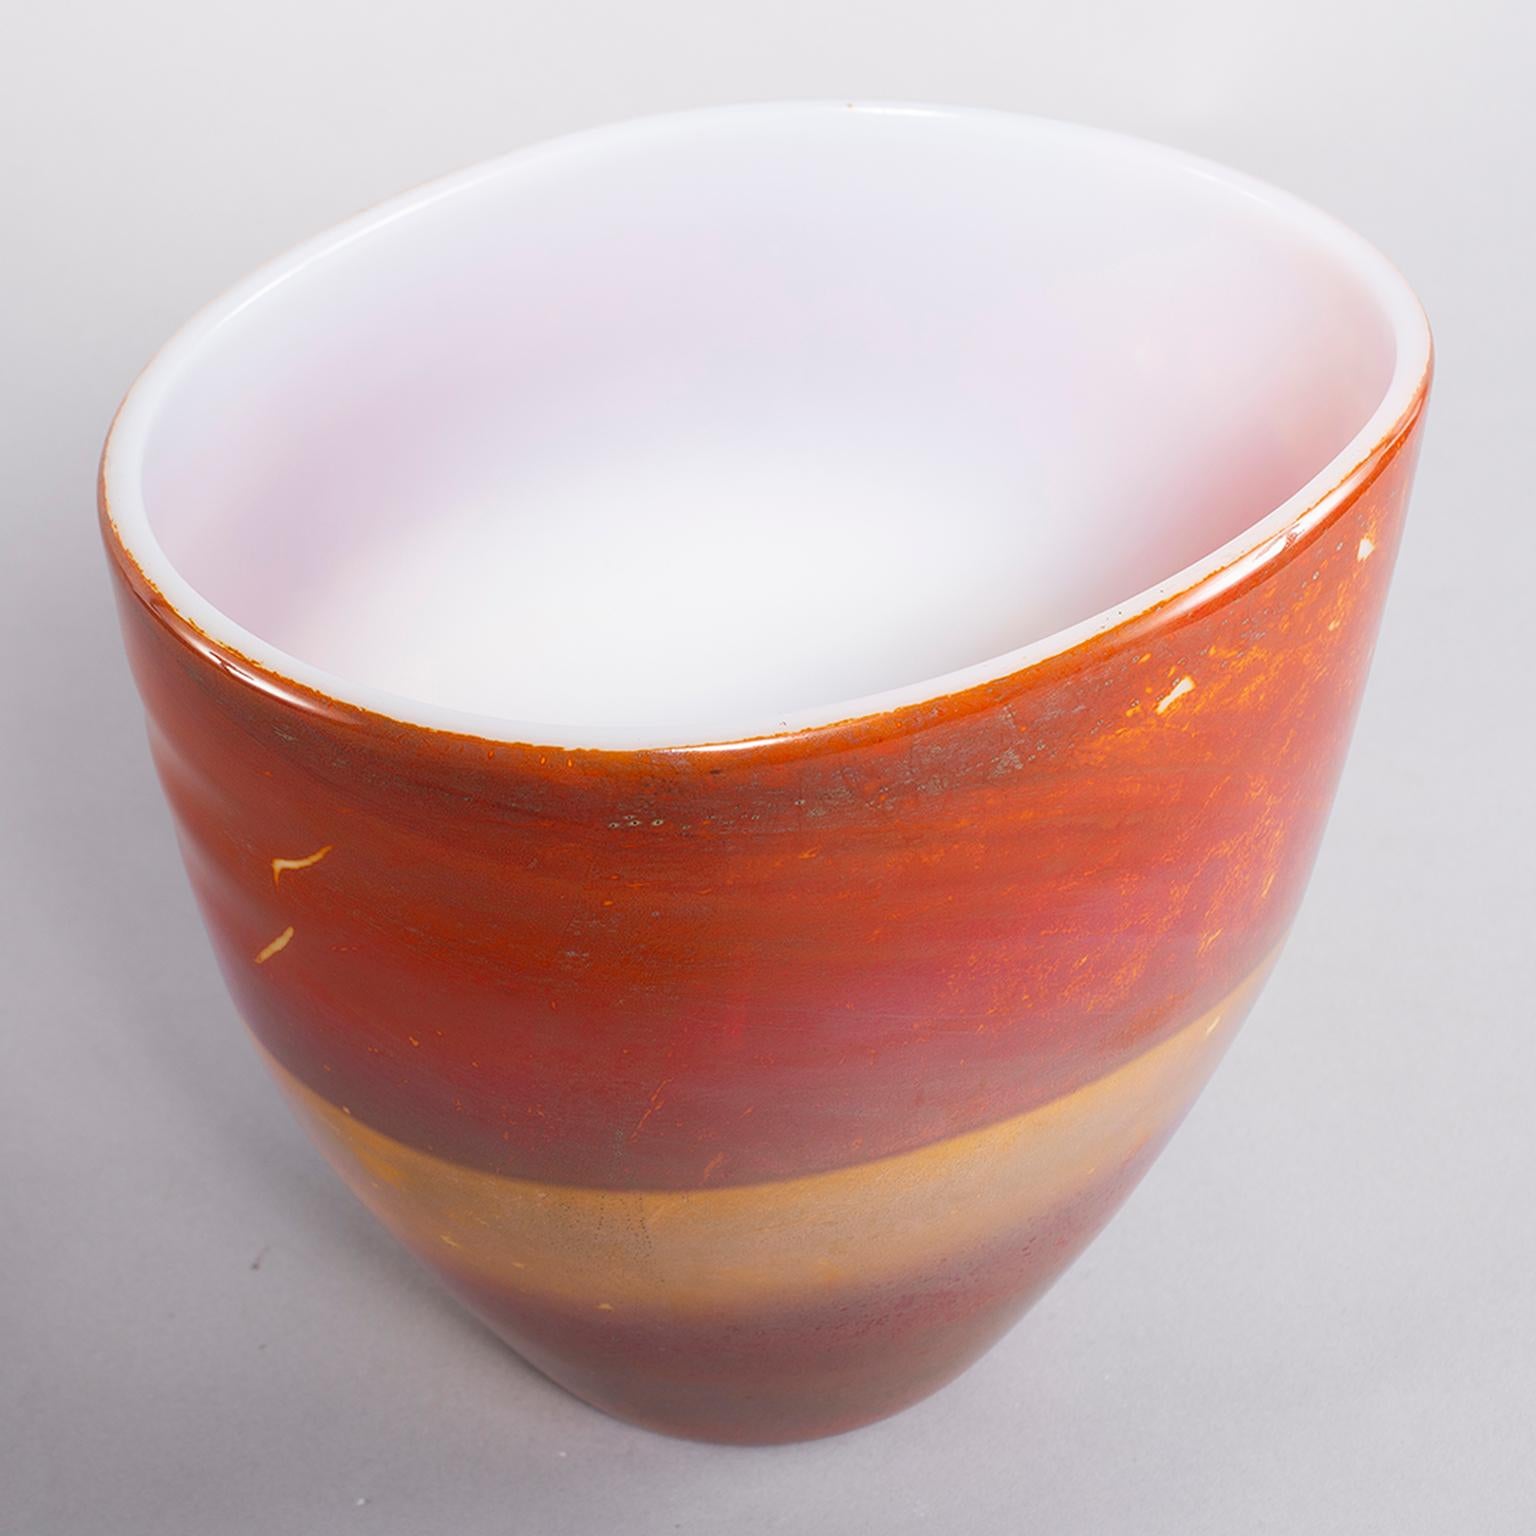 Murano glass opaline bowl form vase by Ermanno Nason for Antonio da Ros features rich color bands of red, amber and ochre. Excellent vintage condition with no flaws found, circa 1960s.